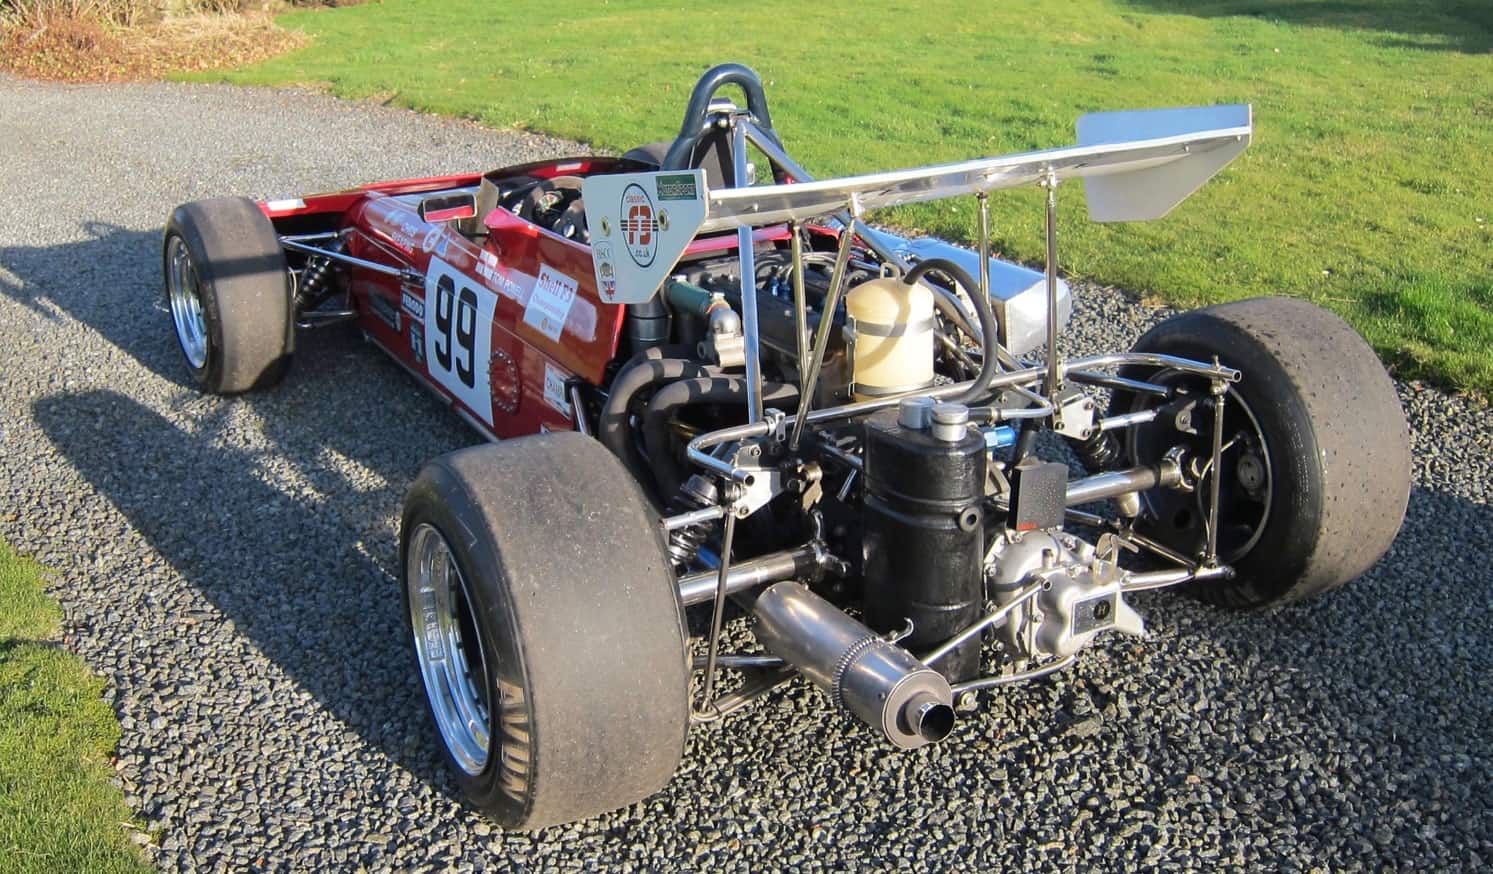 Chevron F3, Chevron built one B20 for Formula 3, and it’s going to auction, ClassicCars.com Journal